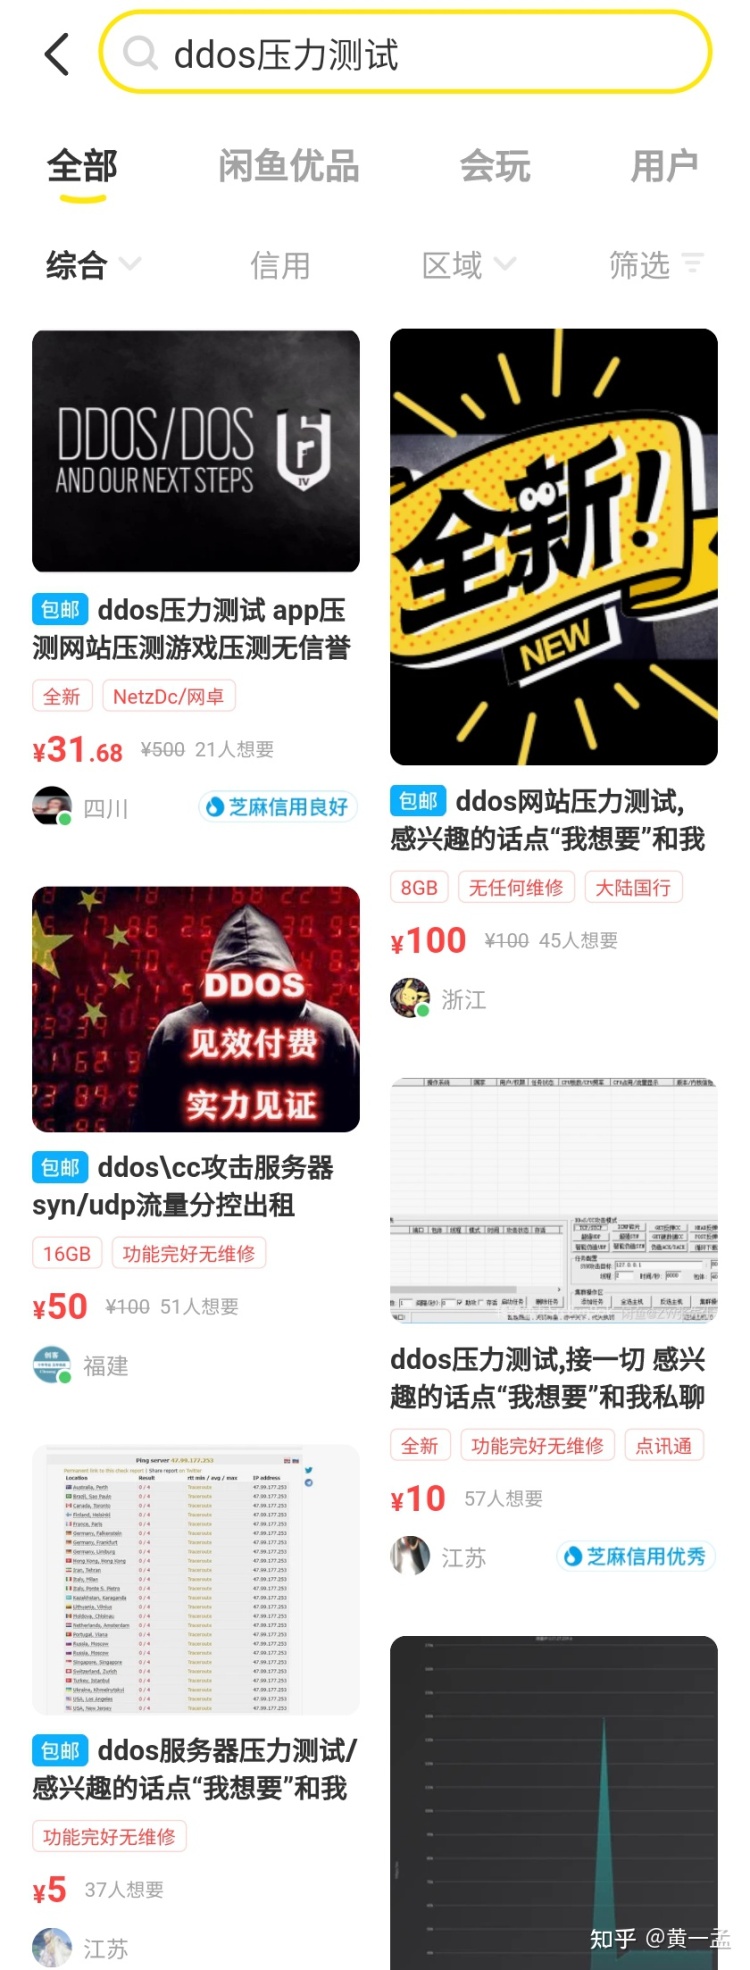 A screenshot of DDoS-for-hire postings on e-commerce website Xianyu. Image Credit: Huang Yimeng